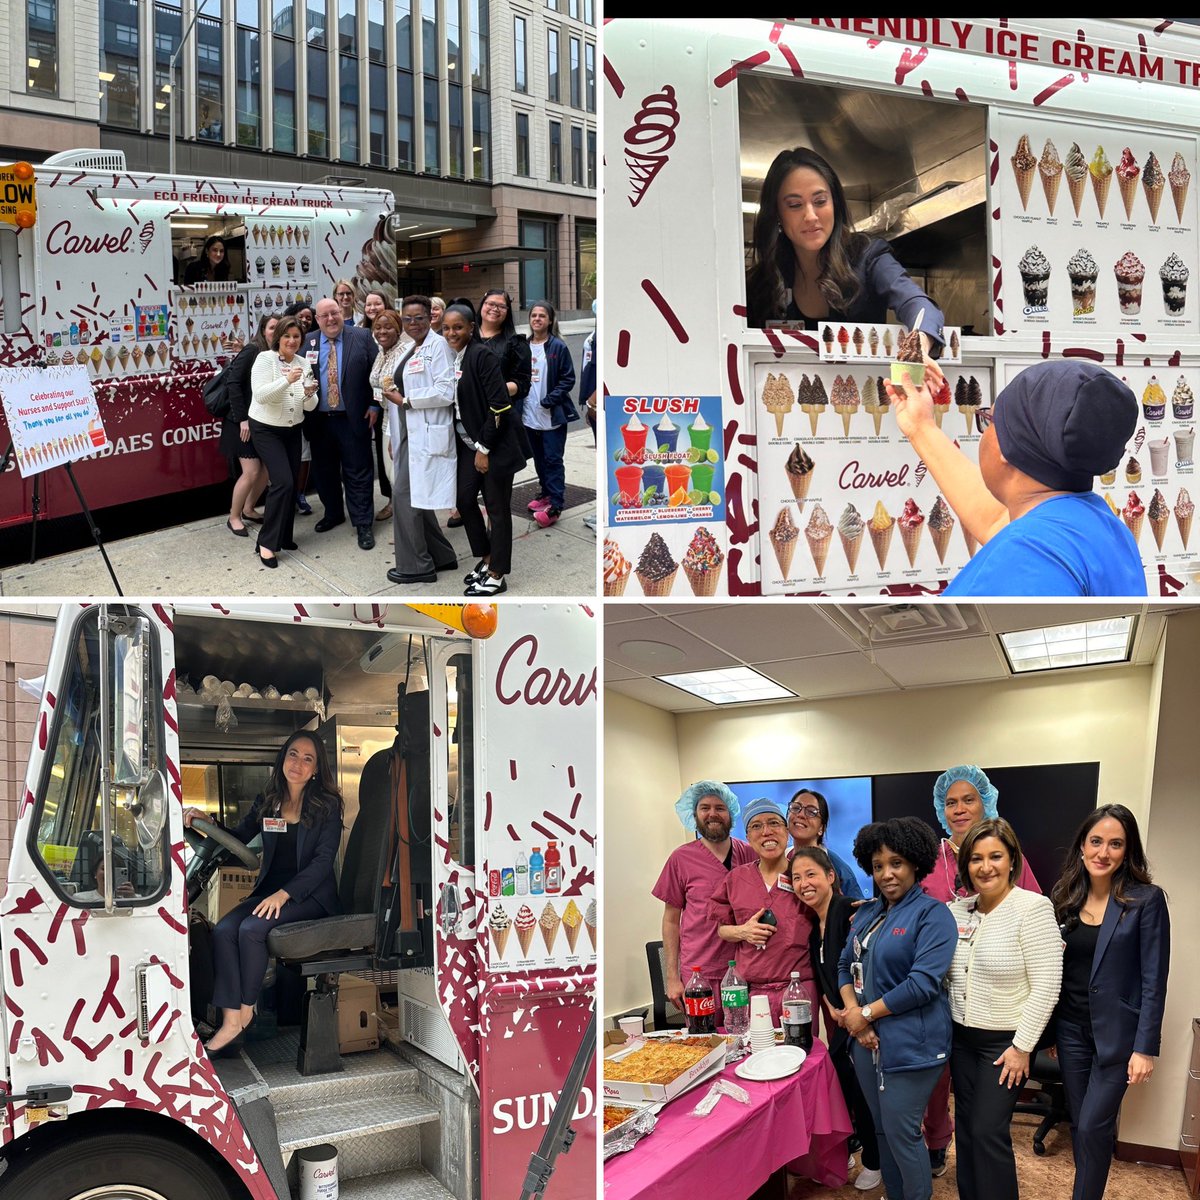 Nursing Week Celebration Continues with Ice Cream Trucks! BMH Leaders @AnnalisseMahon, Serving Delicious NYP Treats to our BMH/CCH Nurse and Support Staff! #Caring4thecaregiver #NursingWeek2024 #ThankYouNYP ❤️🥇❤️ @WillieMManzano @alanmlevin @lystra_m